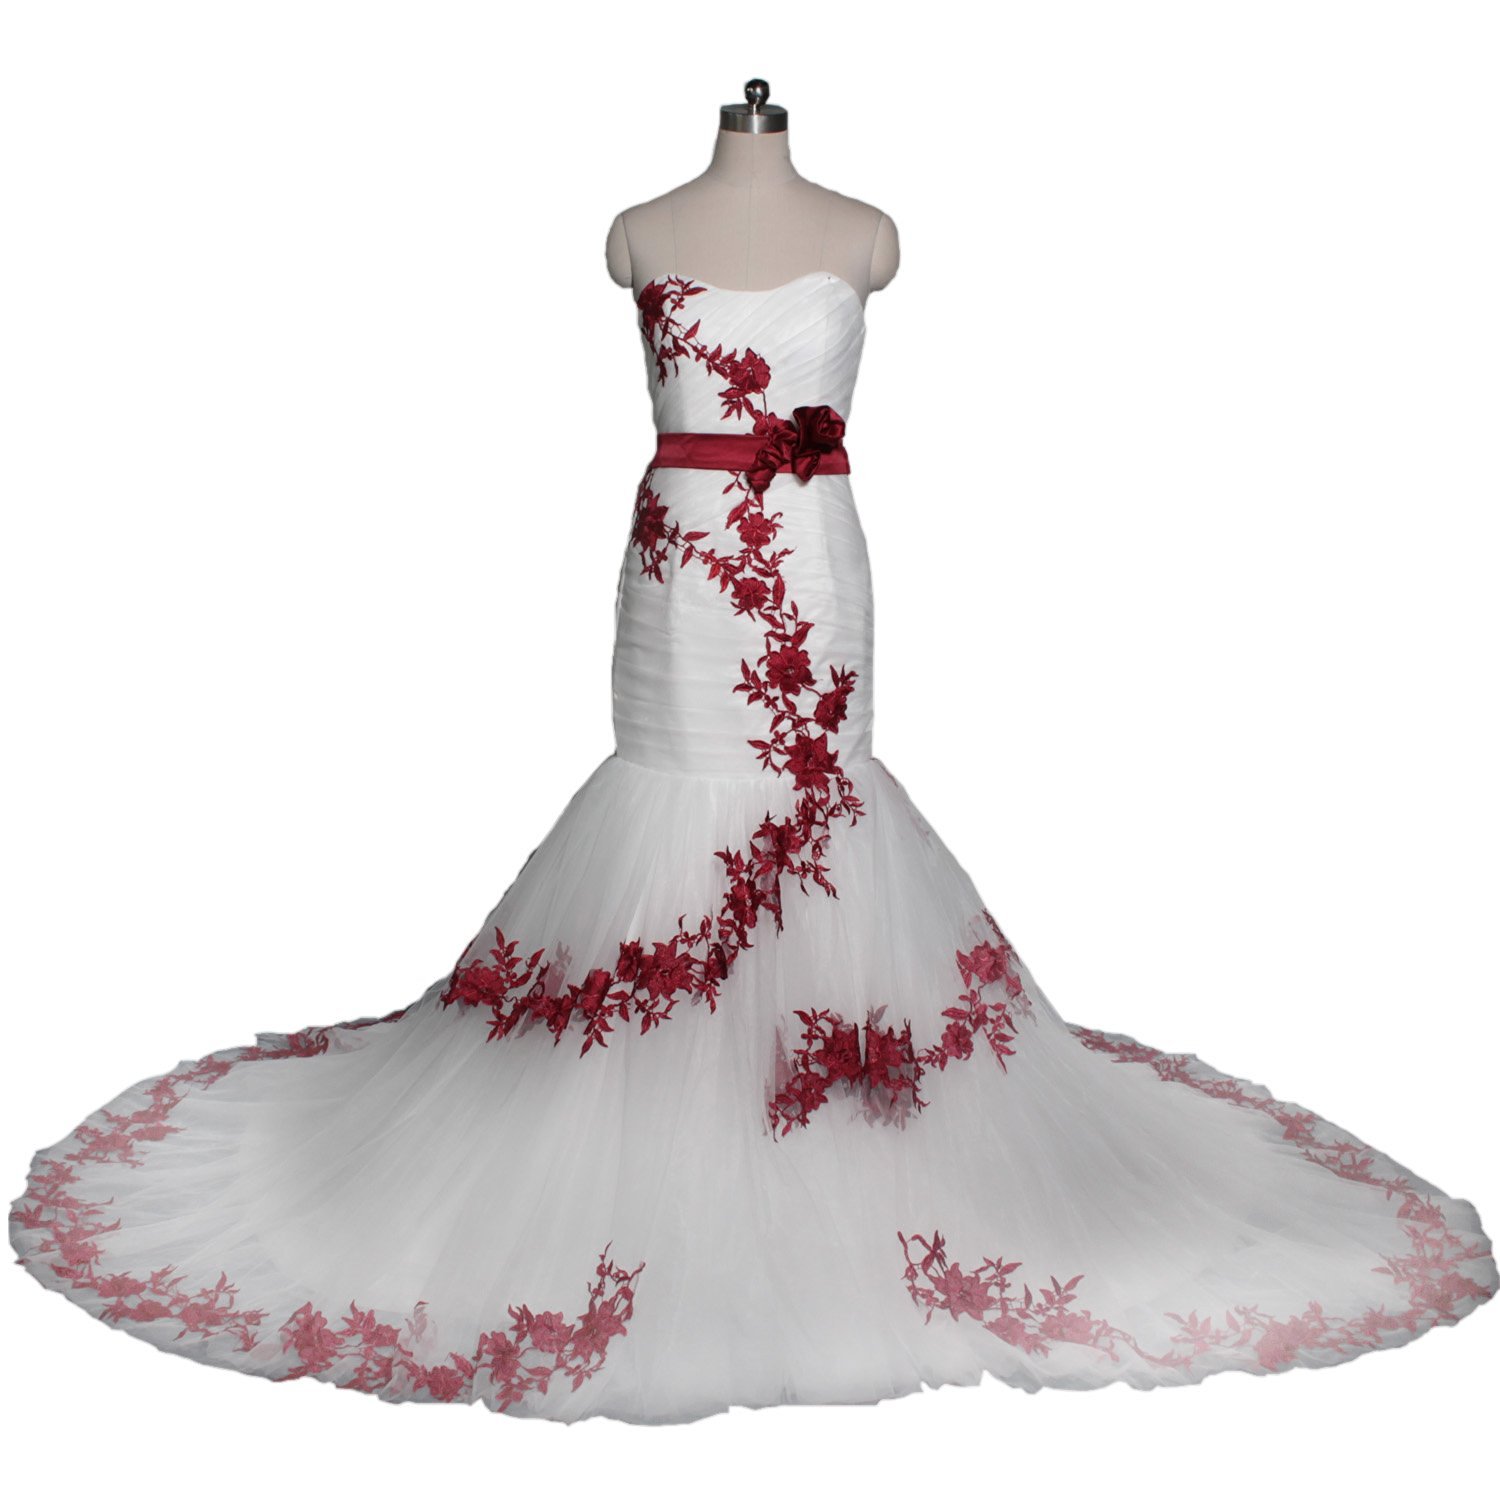 FairOnly White Satin Red Embroidery Strapless Wedding Dress Bridal Gown  (XL, White Red) at Amazon Women's Clothing store